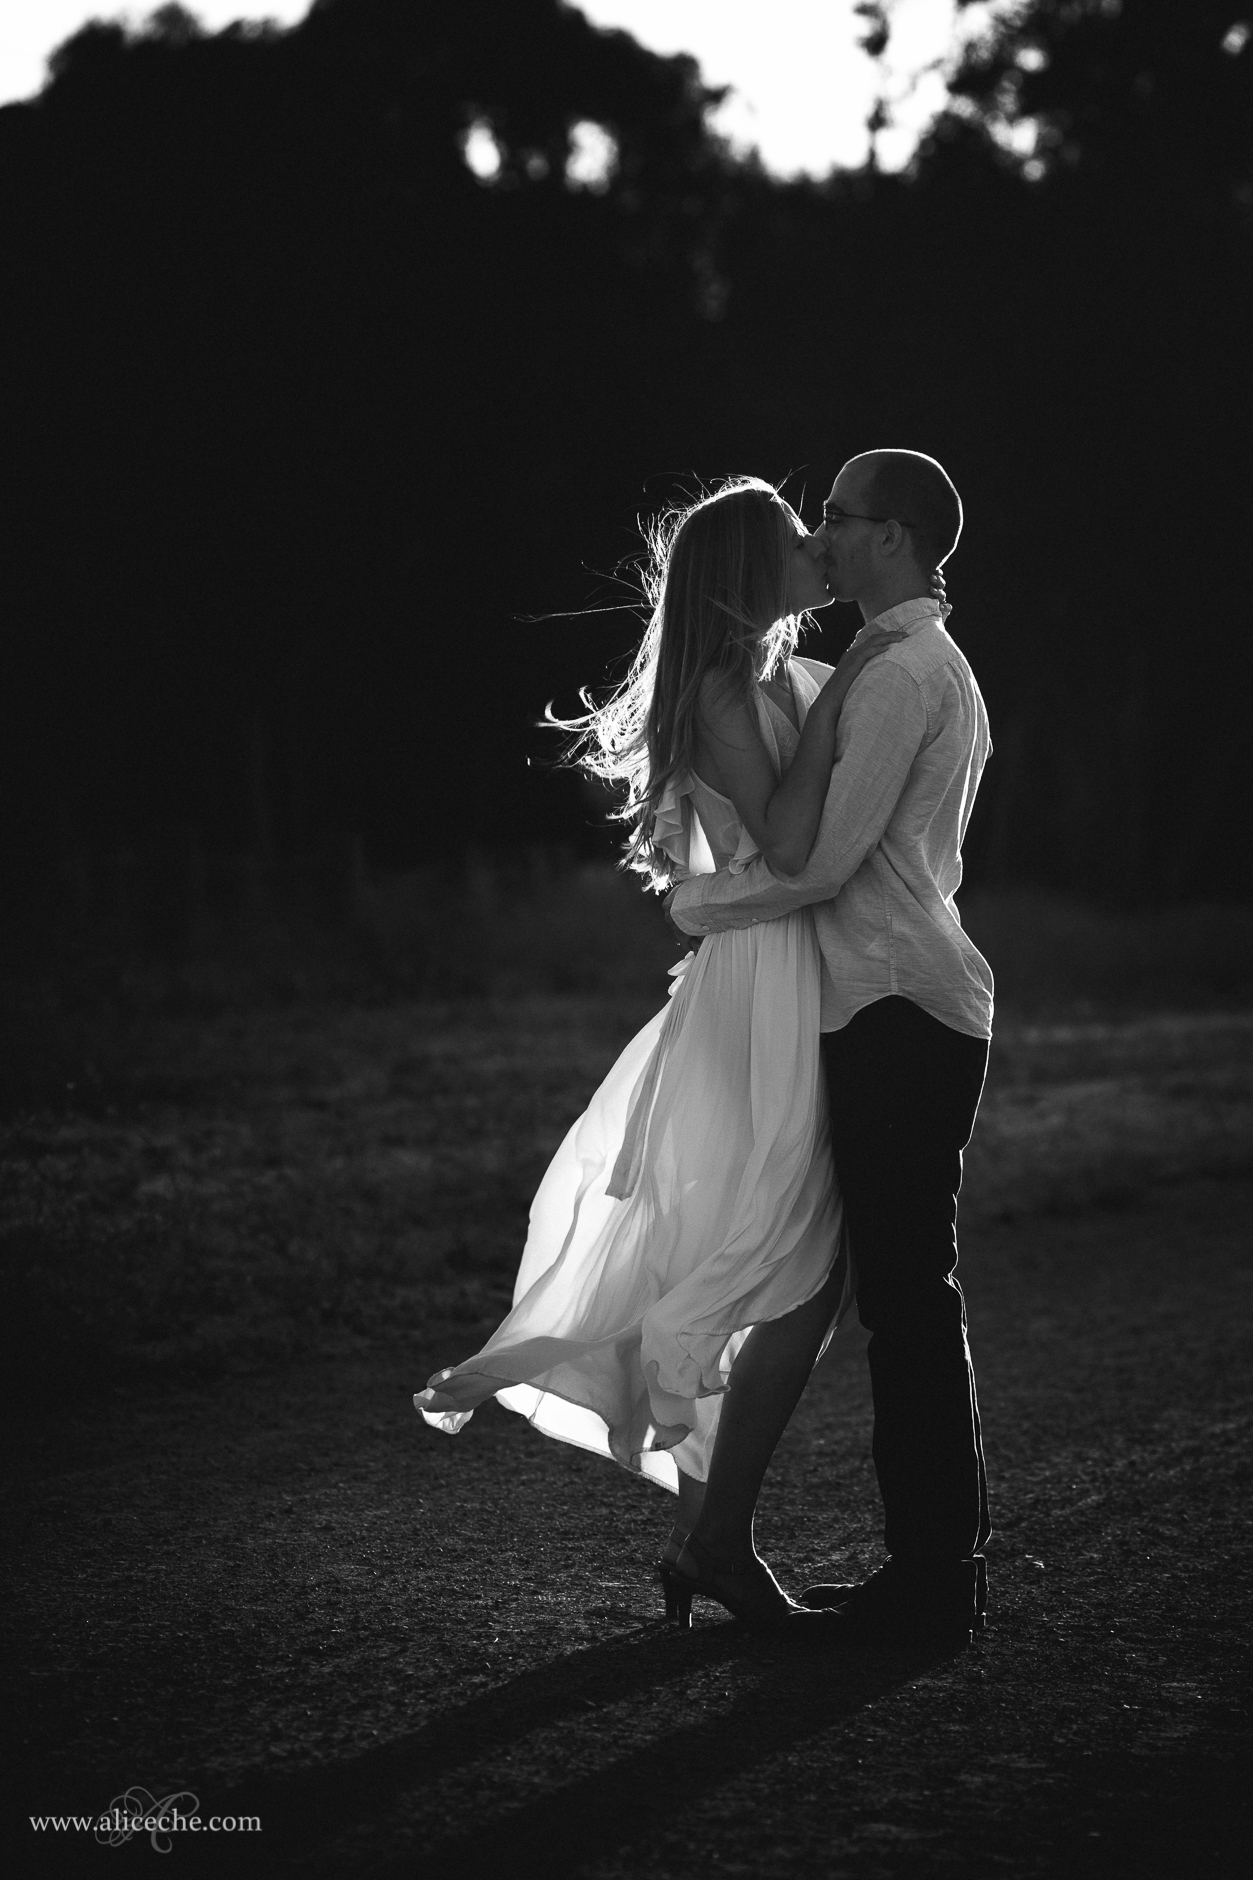 Palo Alto Engagement Photographer Black and White Kissing Couple Wind in Hair and Flowy Dress